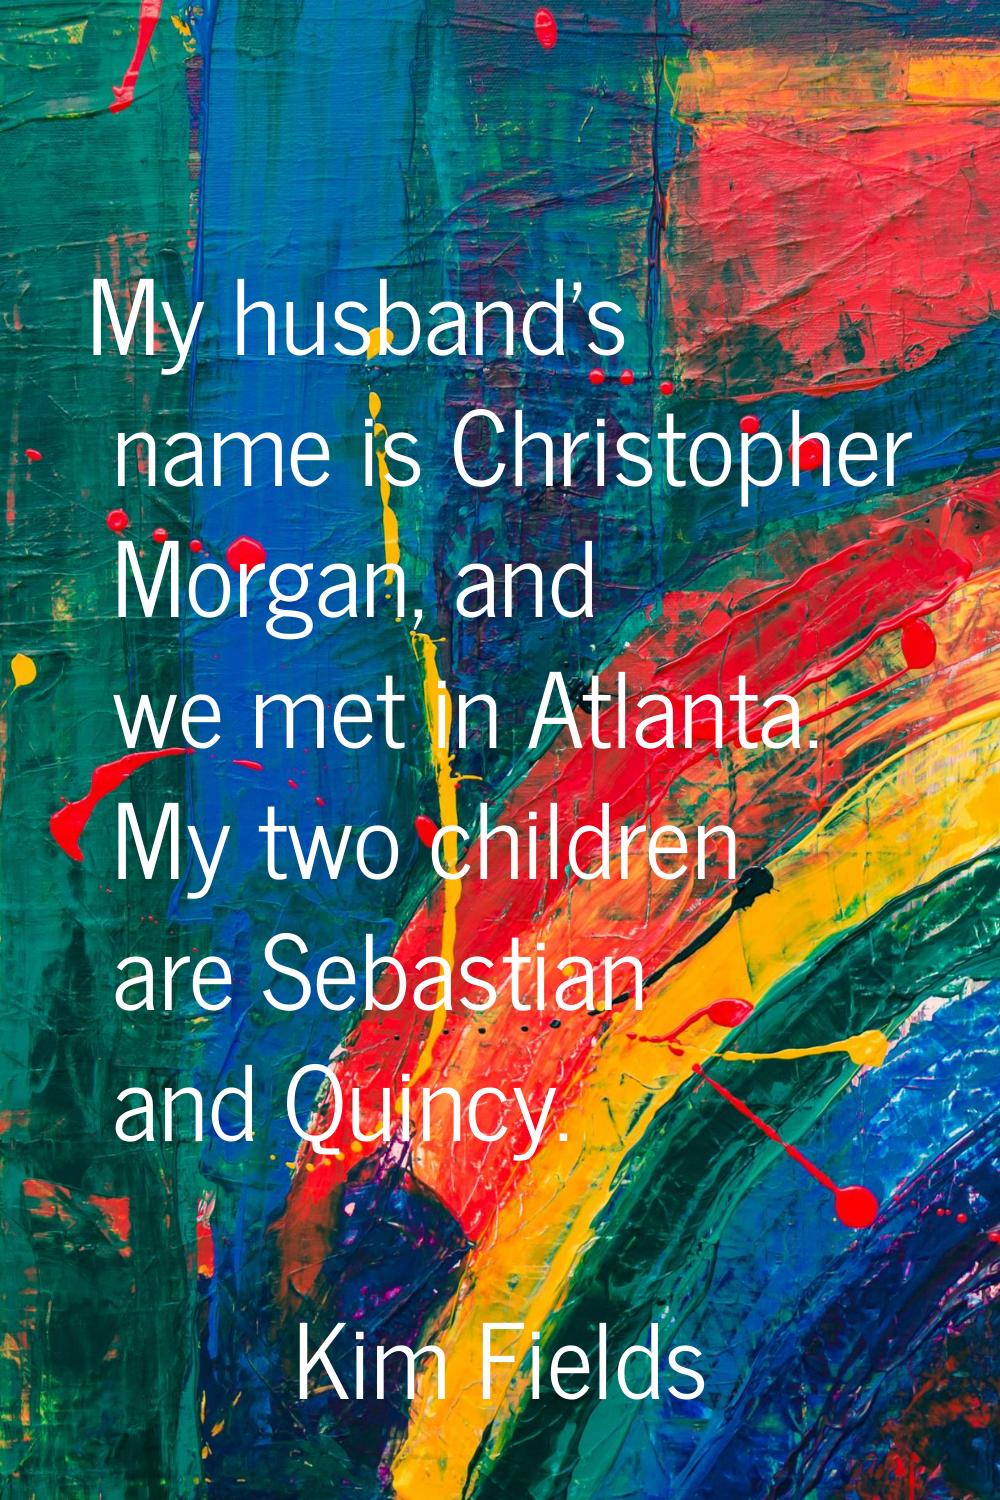 My husband's name is Christopher Morgan, and we met in Atlanta. My two children are Sebastian and Q